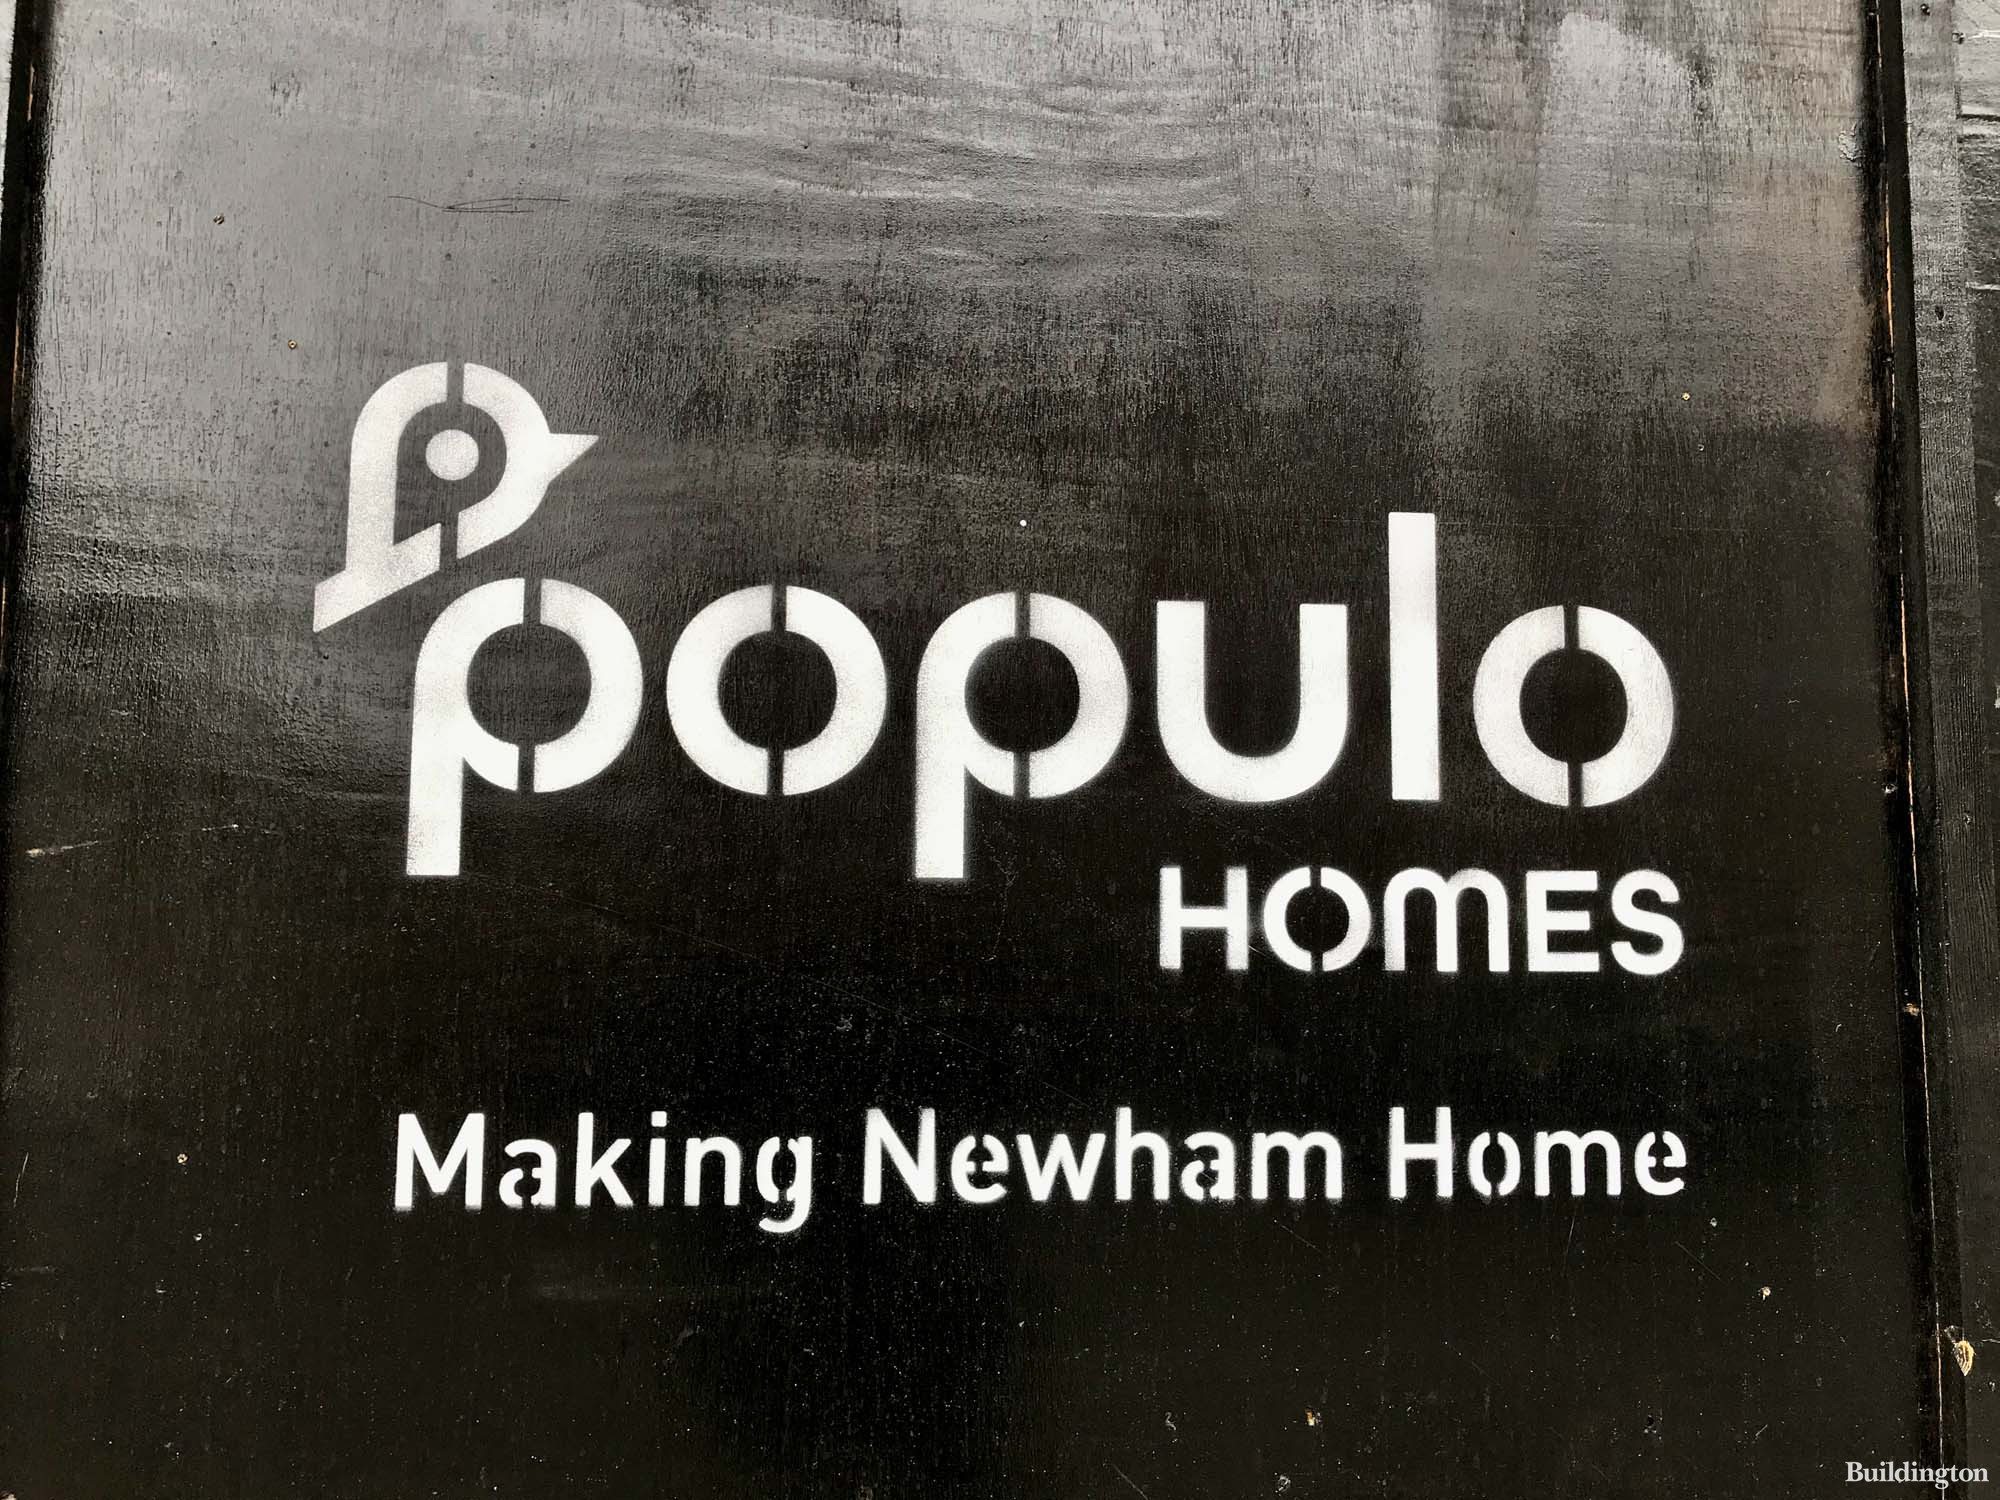 Populo Homes - Making Newham Home. Chargeable Lane site hoarding.